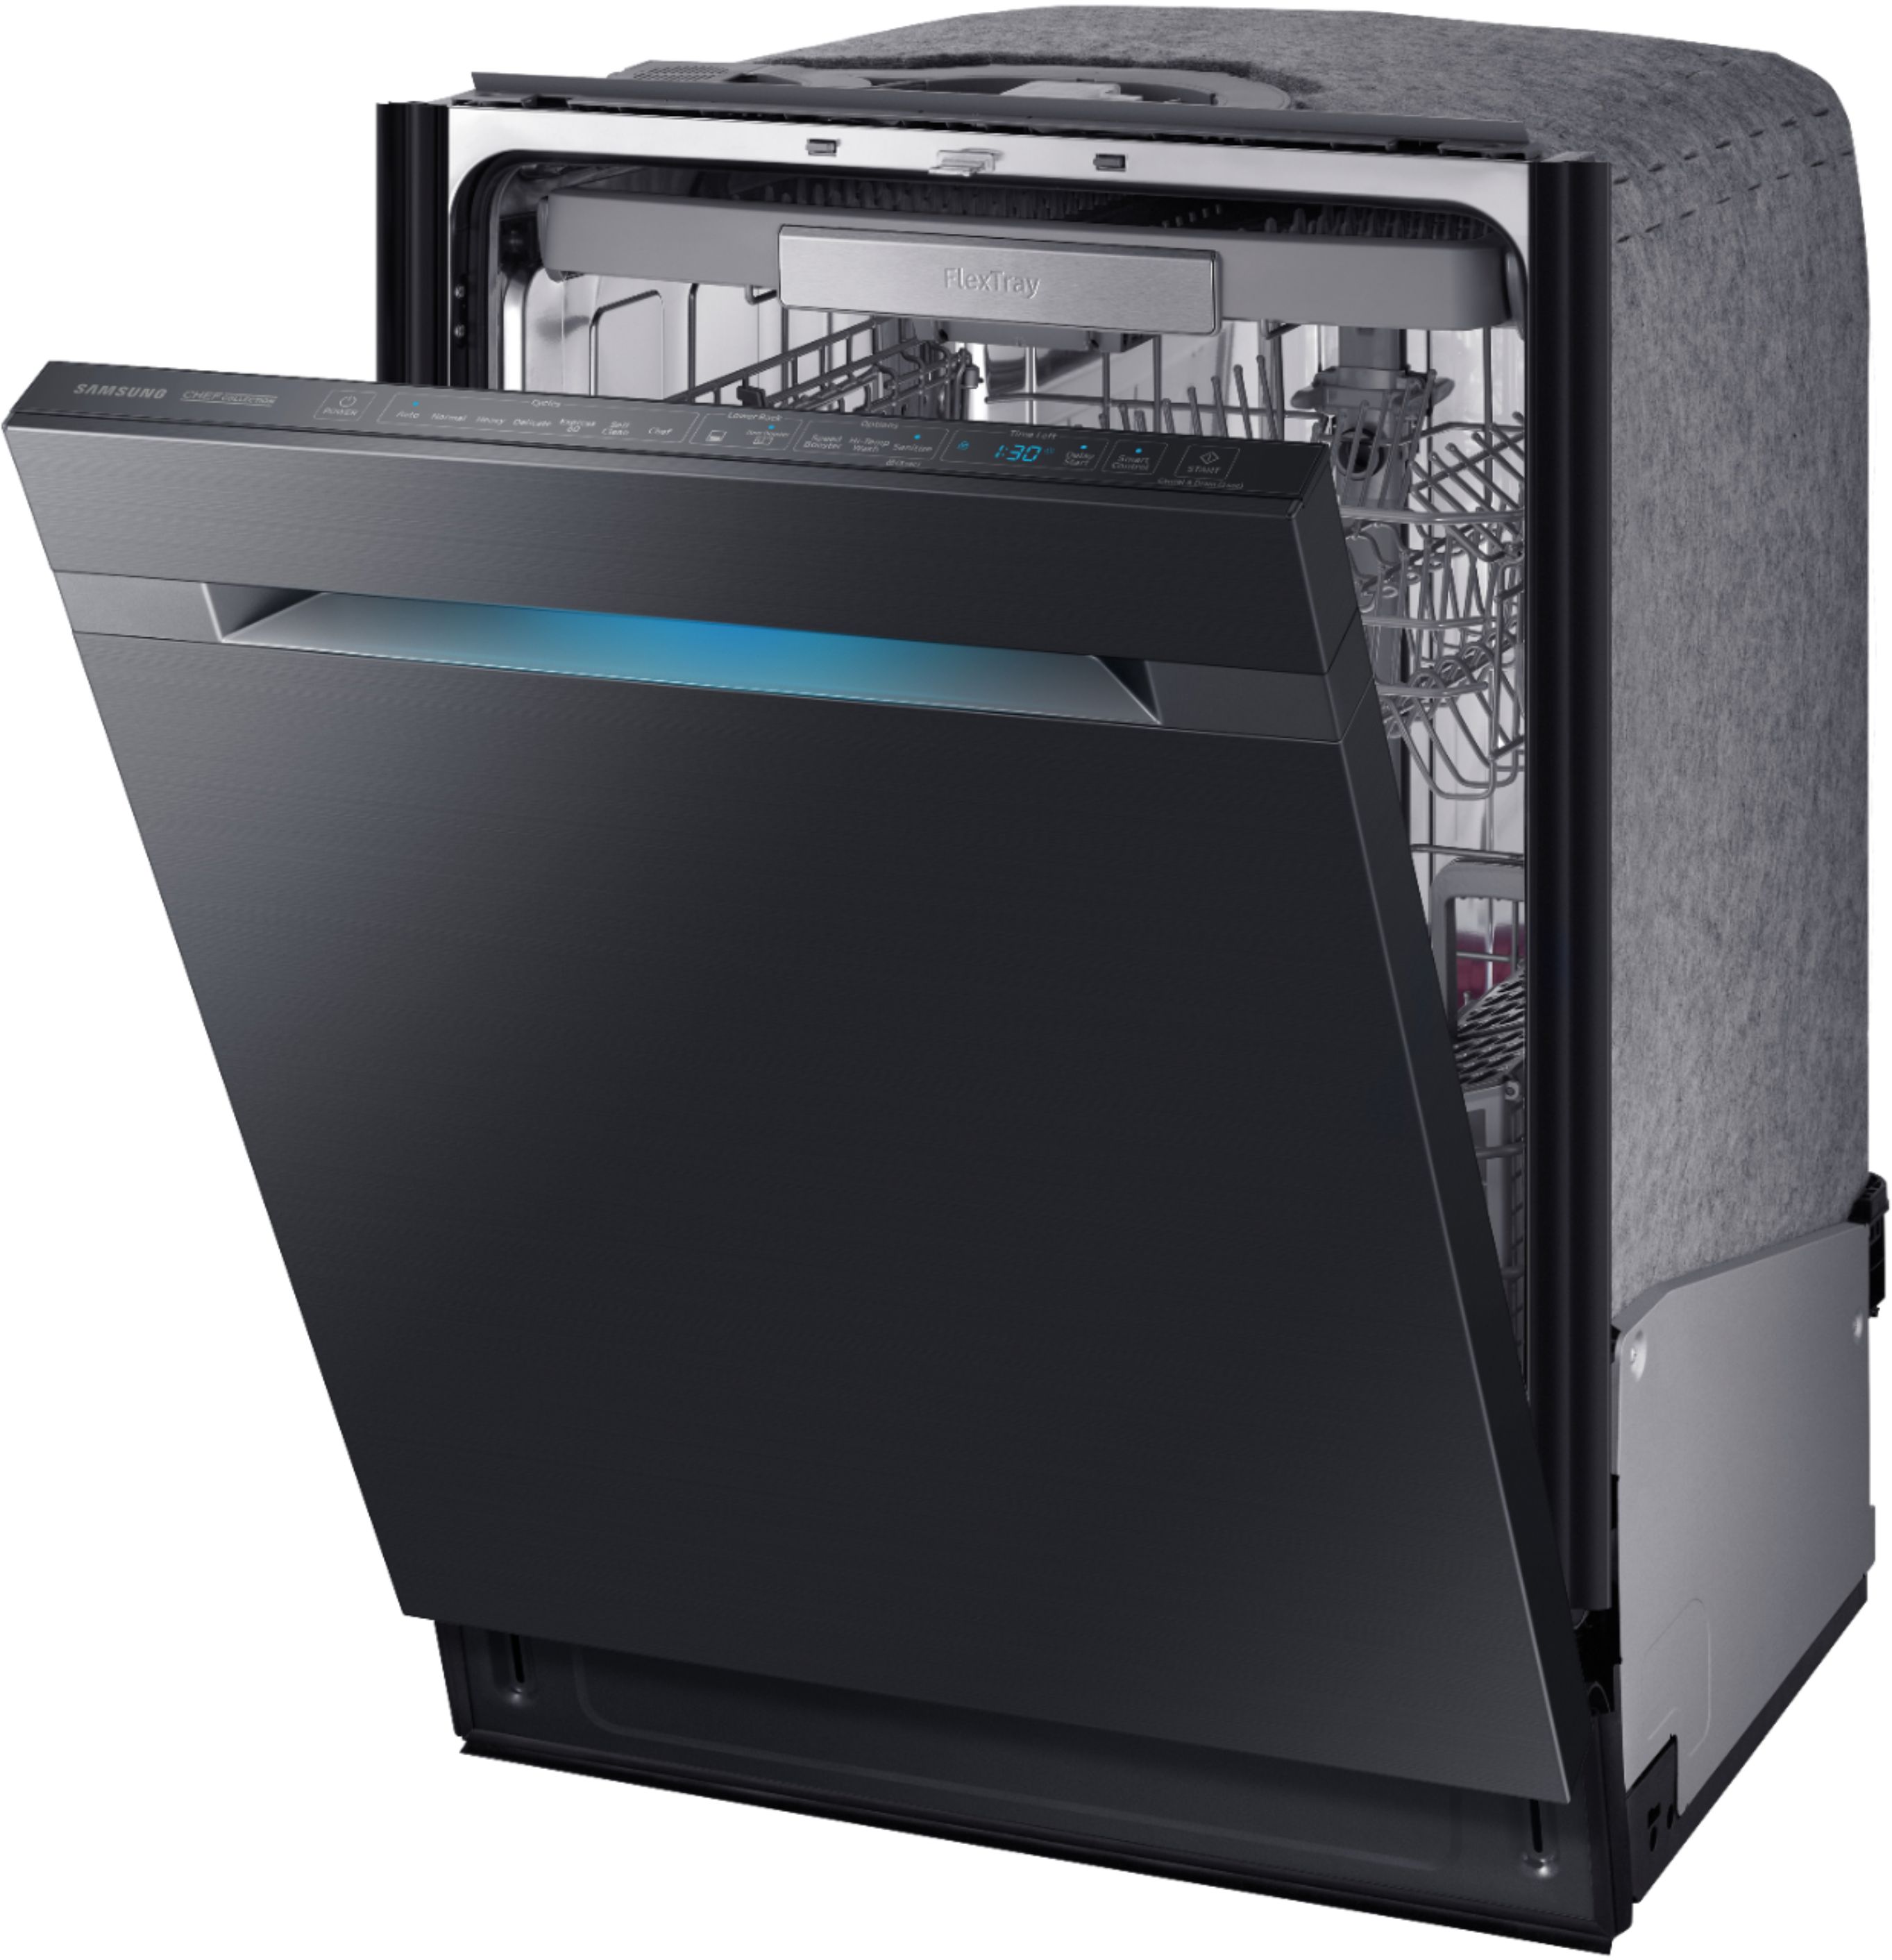 Angle View: JennAir - TriFecta 24" Top Control Built-In Dishwasher with Stainless Steel Tub - Custom Panel Ready